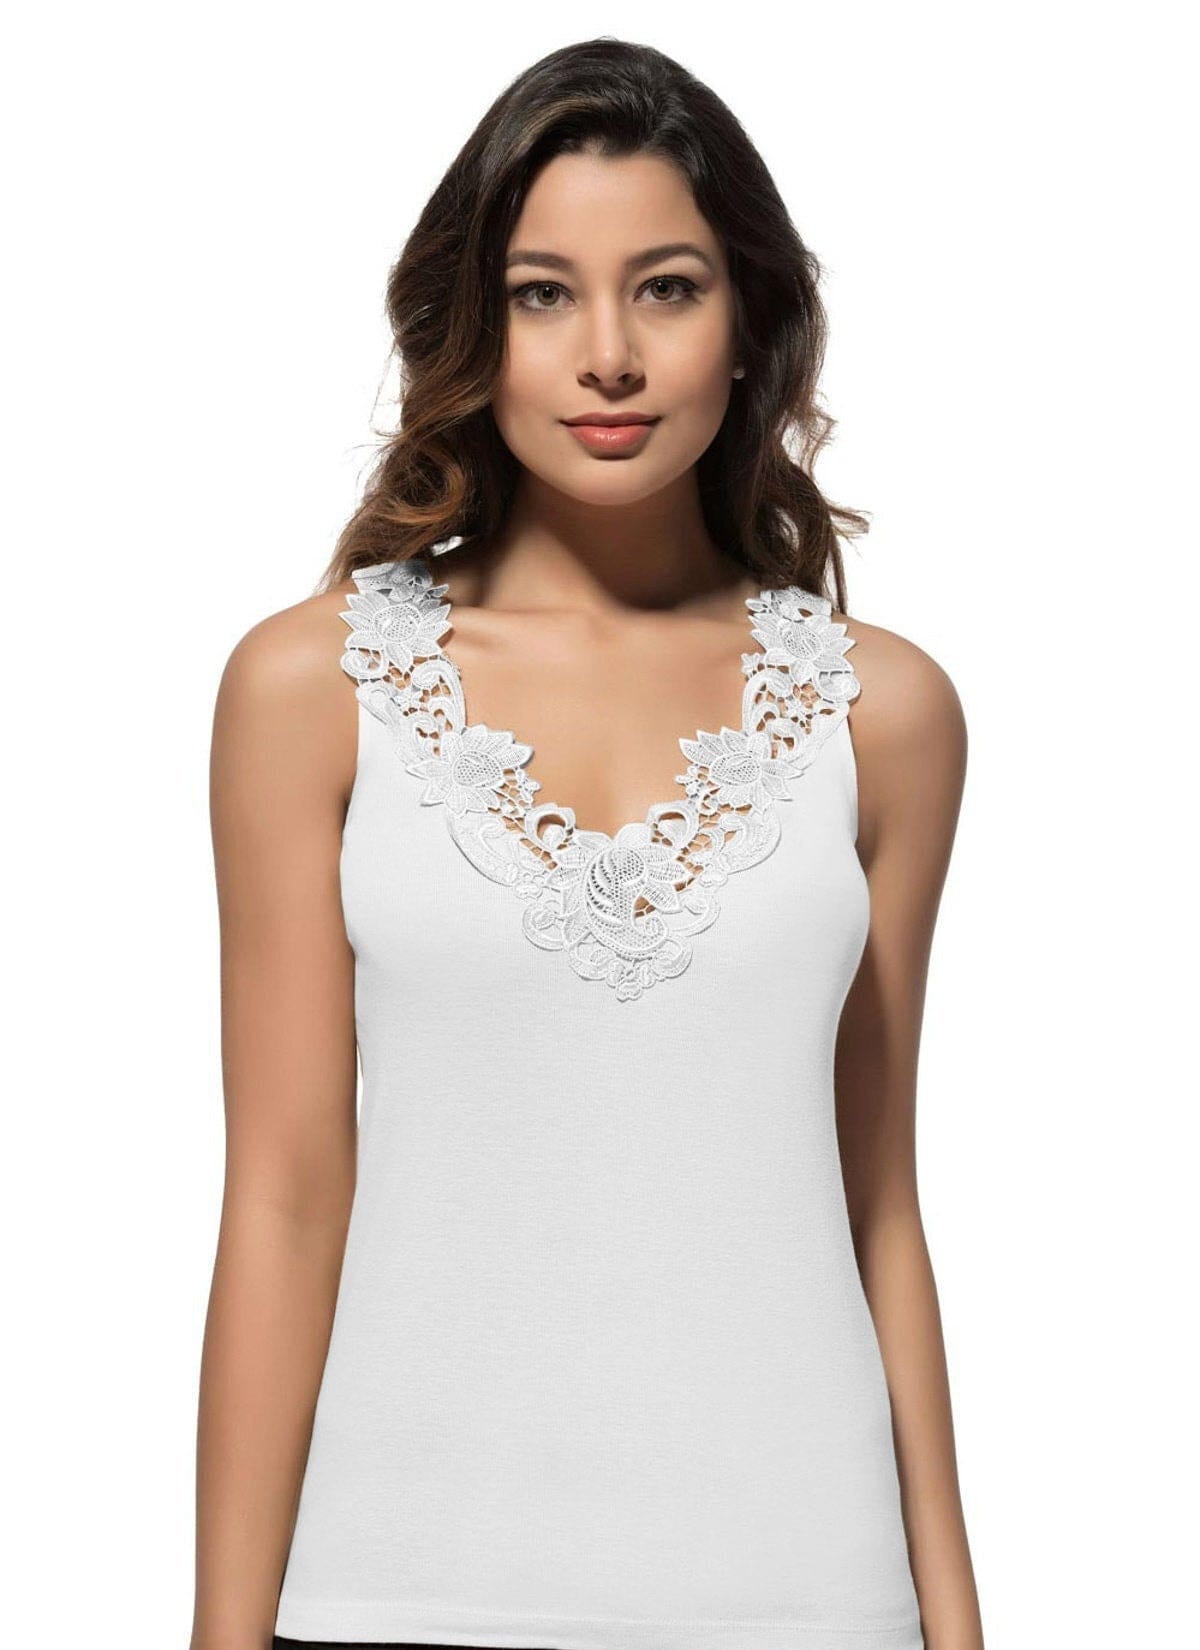 WHITE LACE HIP LENGTH CAMISOLE - FOXERS